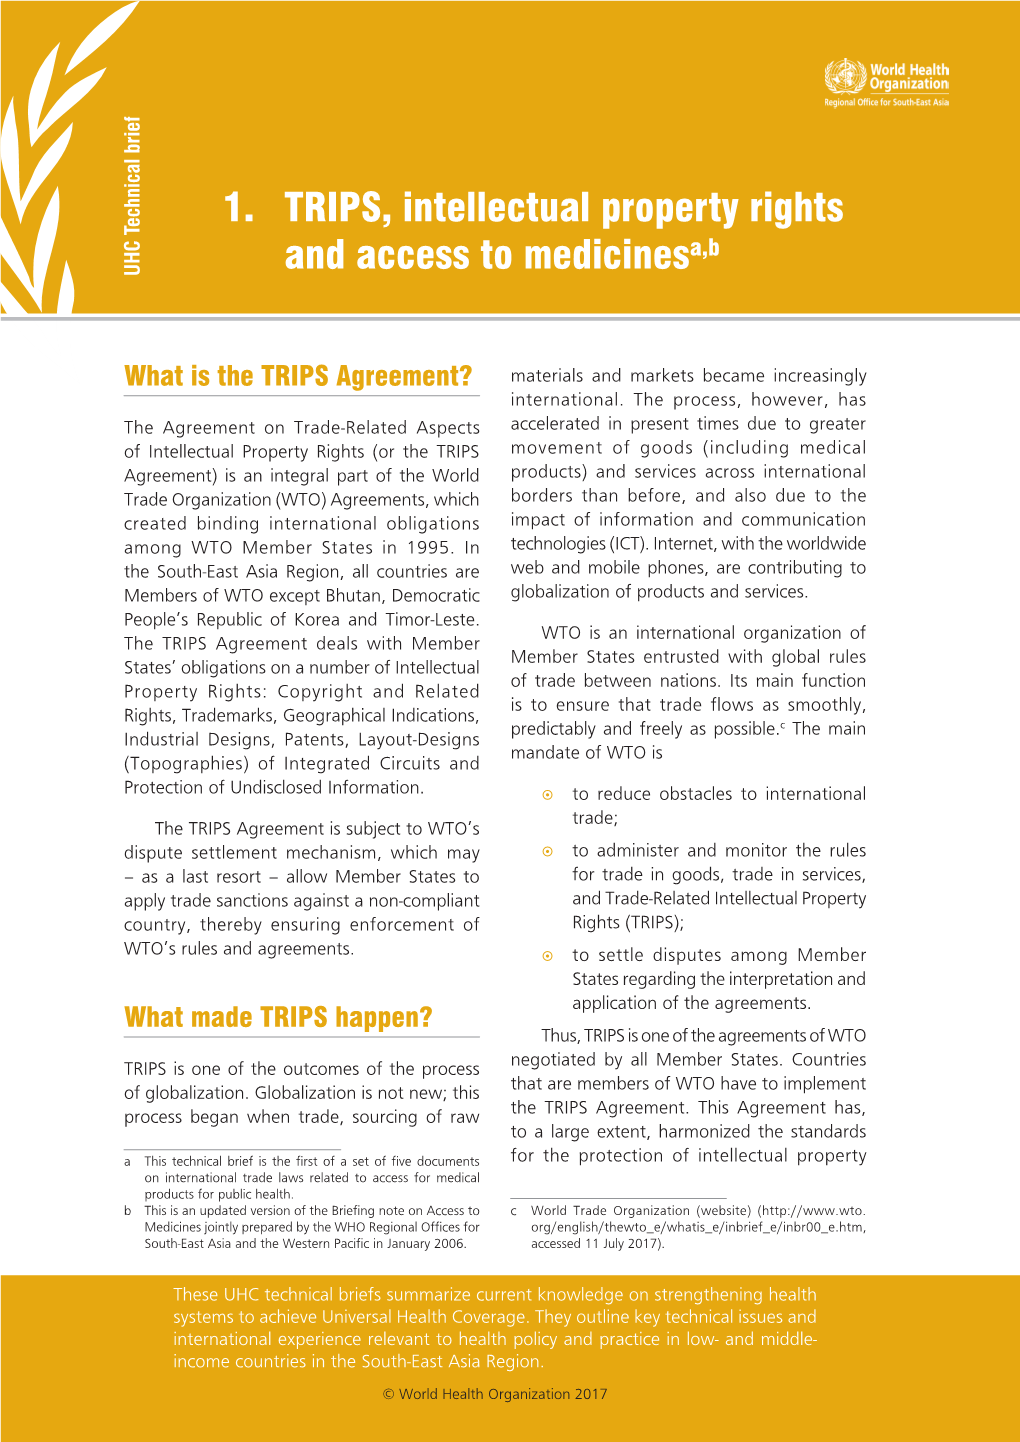 TRIPS, Intellectual Property Rights and Access to Medicines